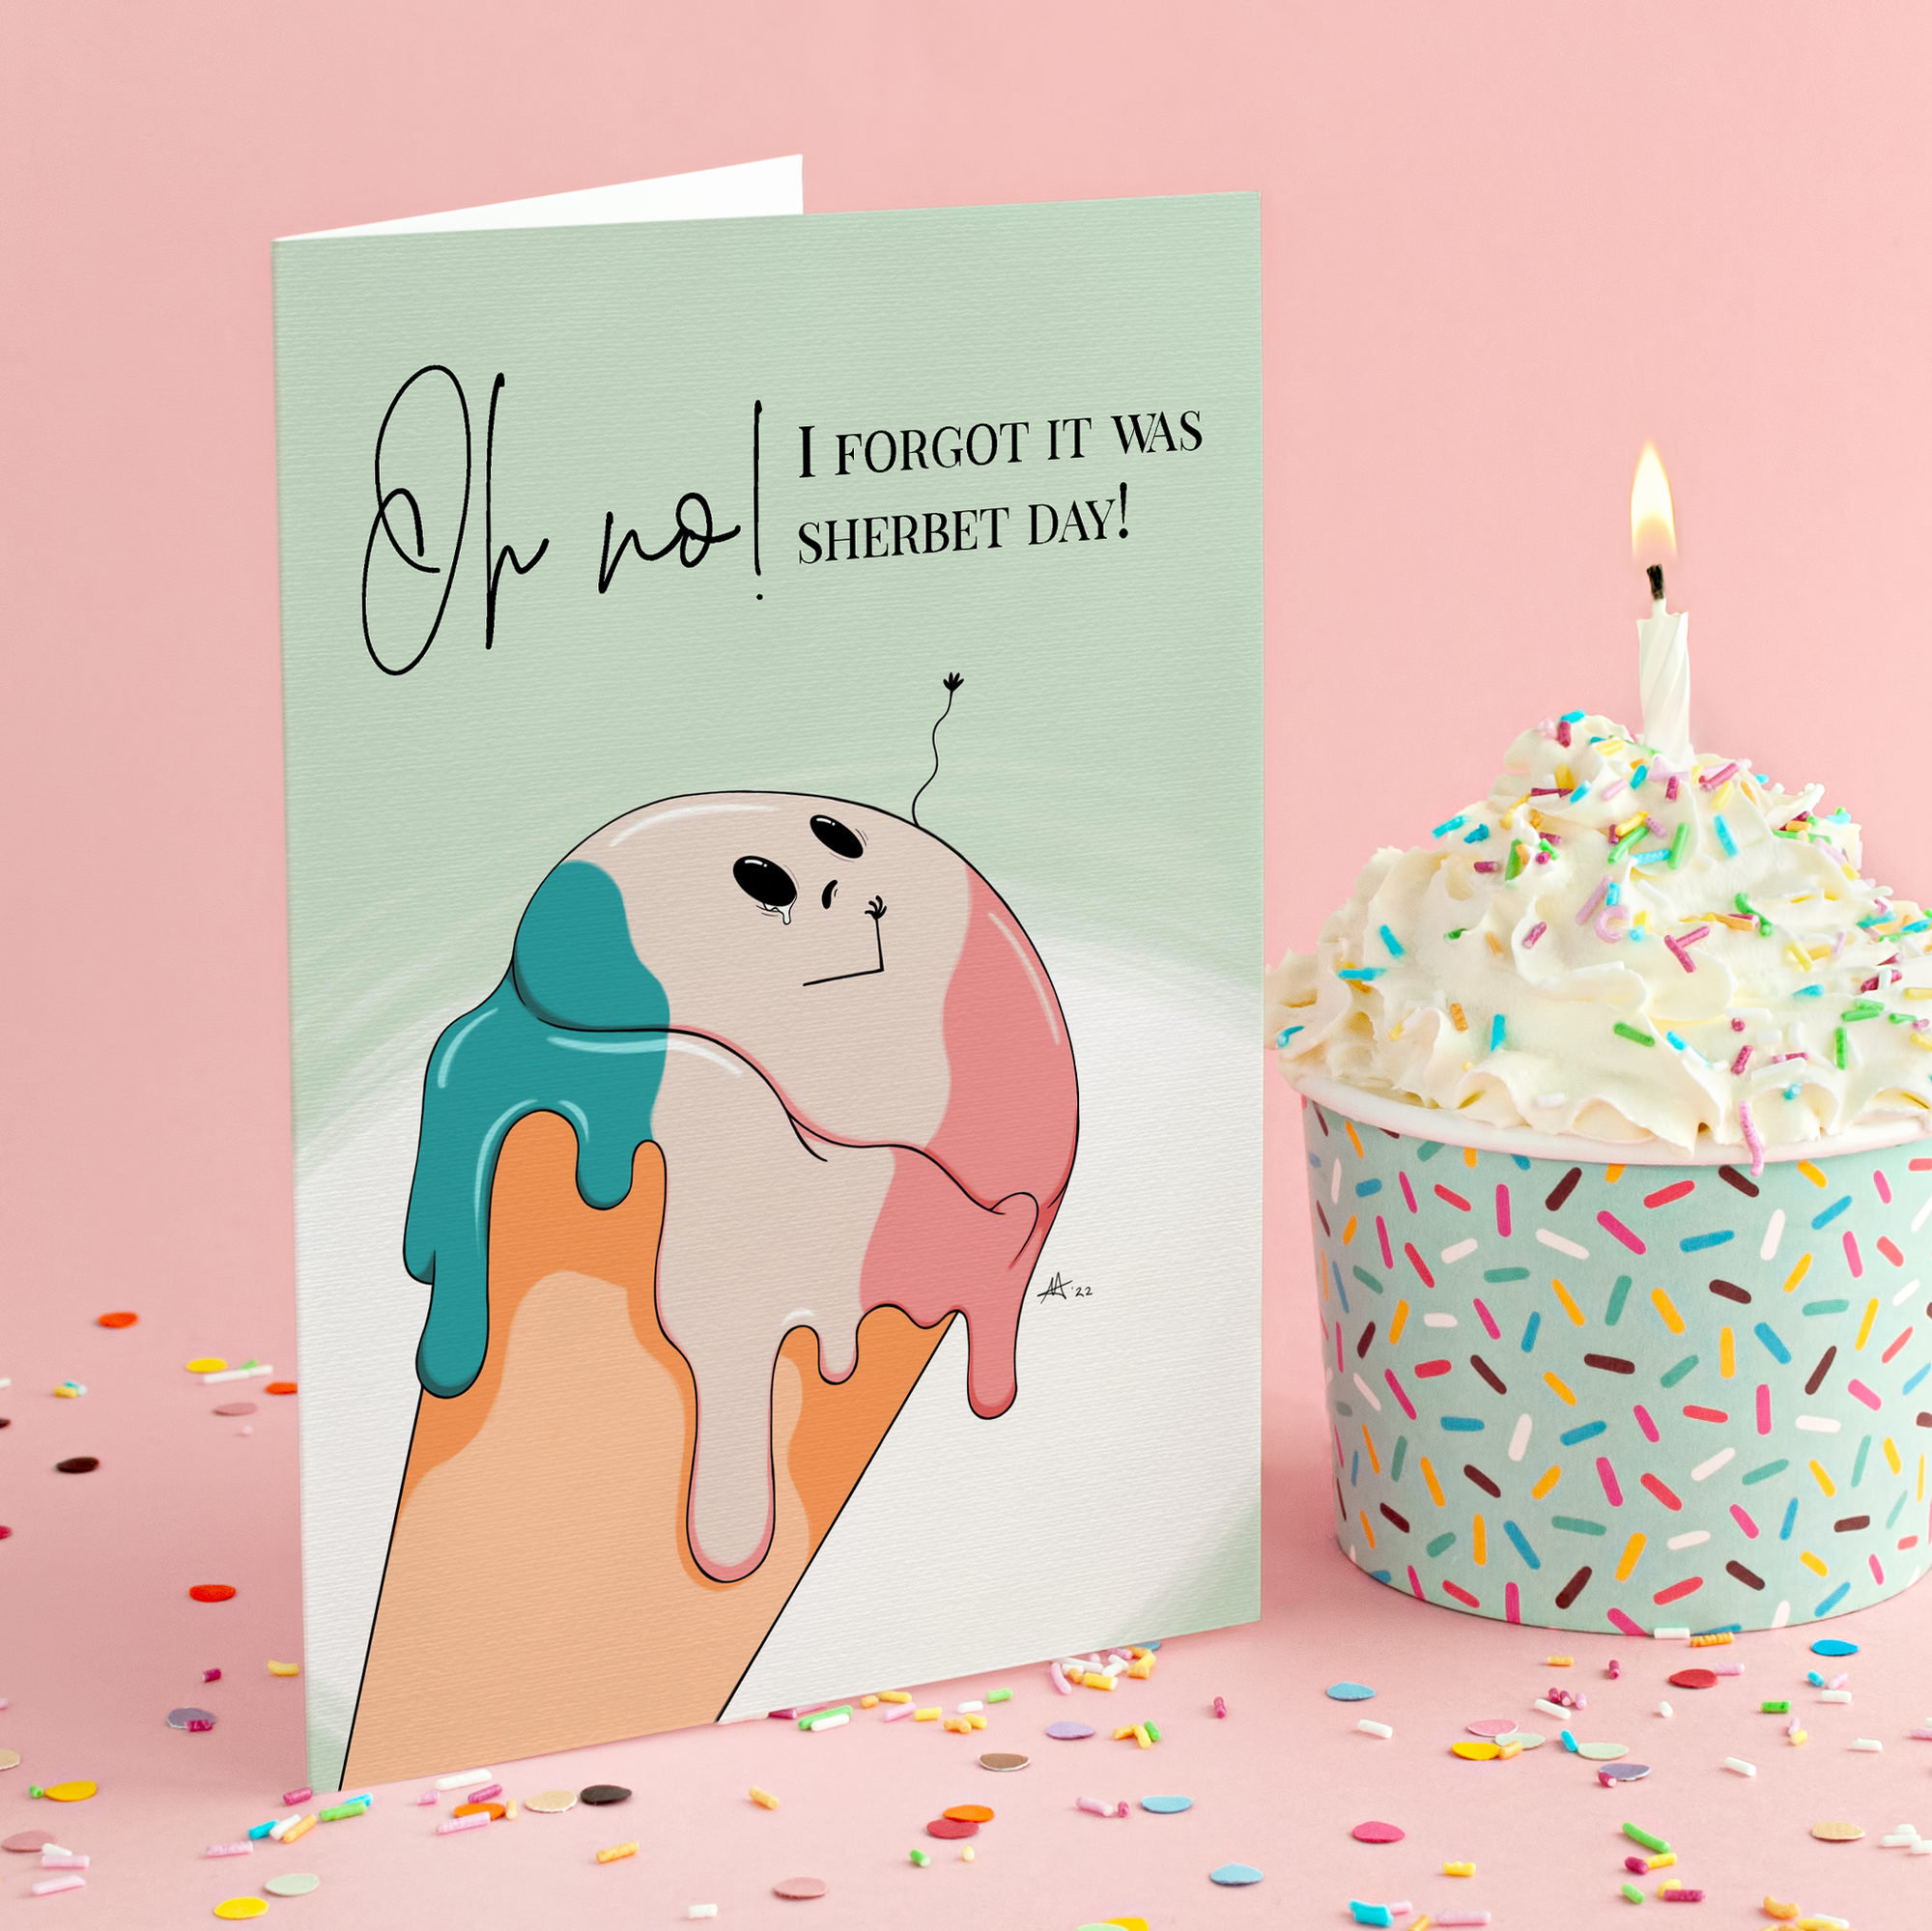 "Oh no! I forgot it was sherbet day!" - Greeting Card / Small Print